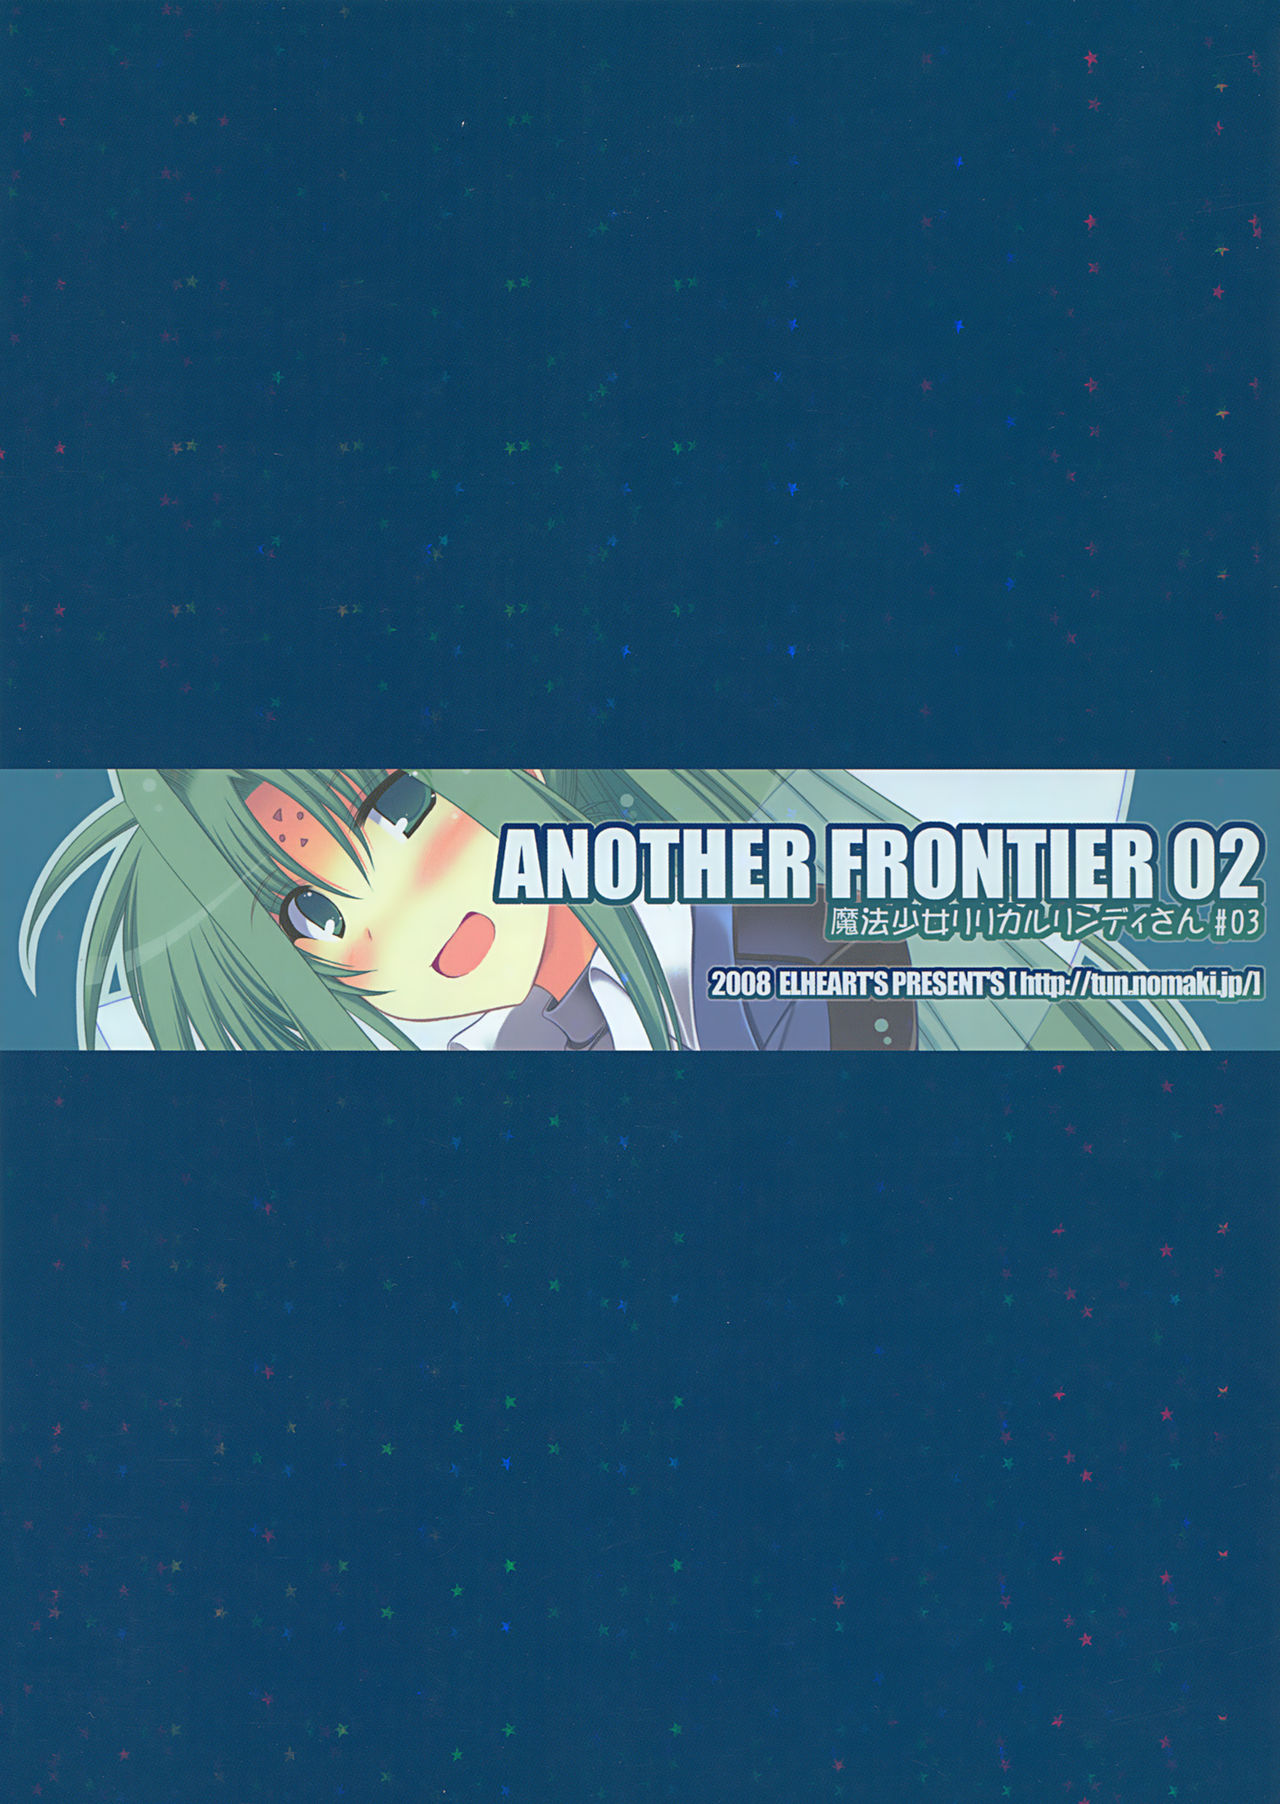 (C74) [ELHEART'S (Ibuki Pon)] ANOTHER FRONTIER 02 Magical Girl Lyrical Lindy-san #03 (Magical Girl Lyrical Nanoha StrikerS) [English] (C74) [ELHEART'S (息吹ポン)] ANOTHER FRONTIER 02 魔法少女リリカルリンディさん #03 (魔法少女リリカルなのはStrikerS) [英訳]